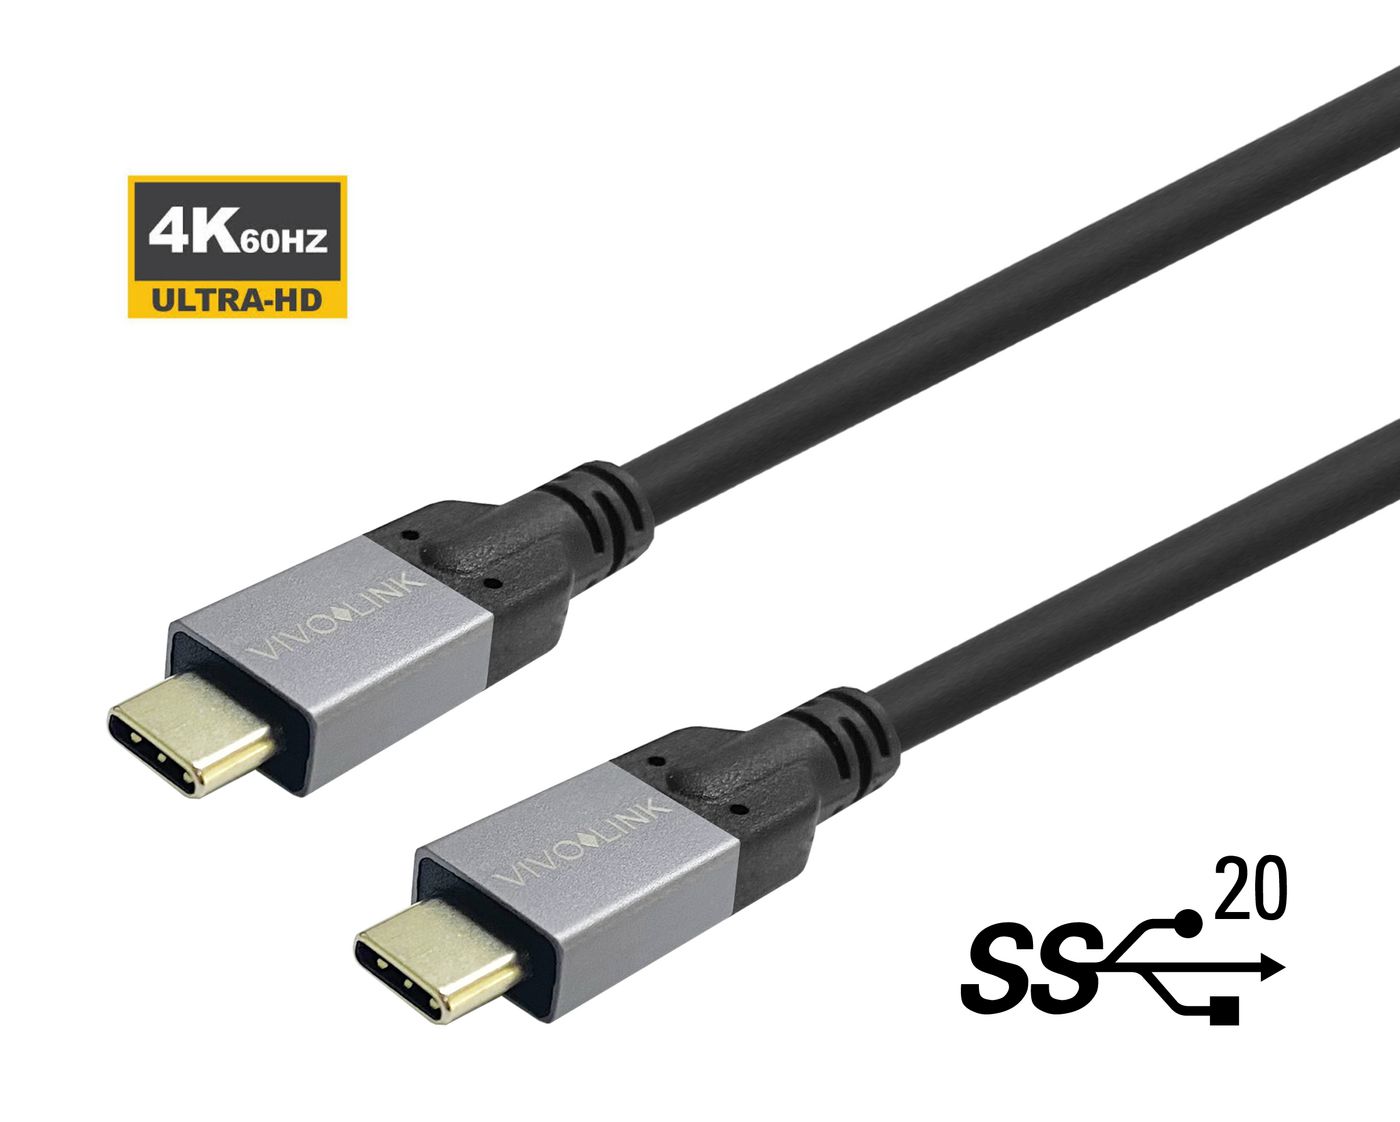 EET USB-C to Cable 2m Supports 20 Gbps data - Kabel - Digital/Daten (PROUSBCMM2)